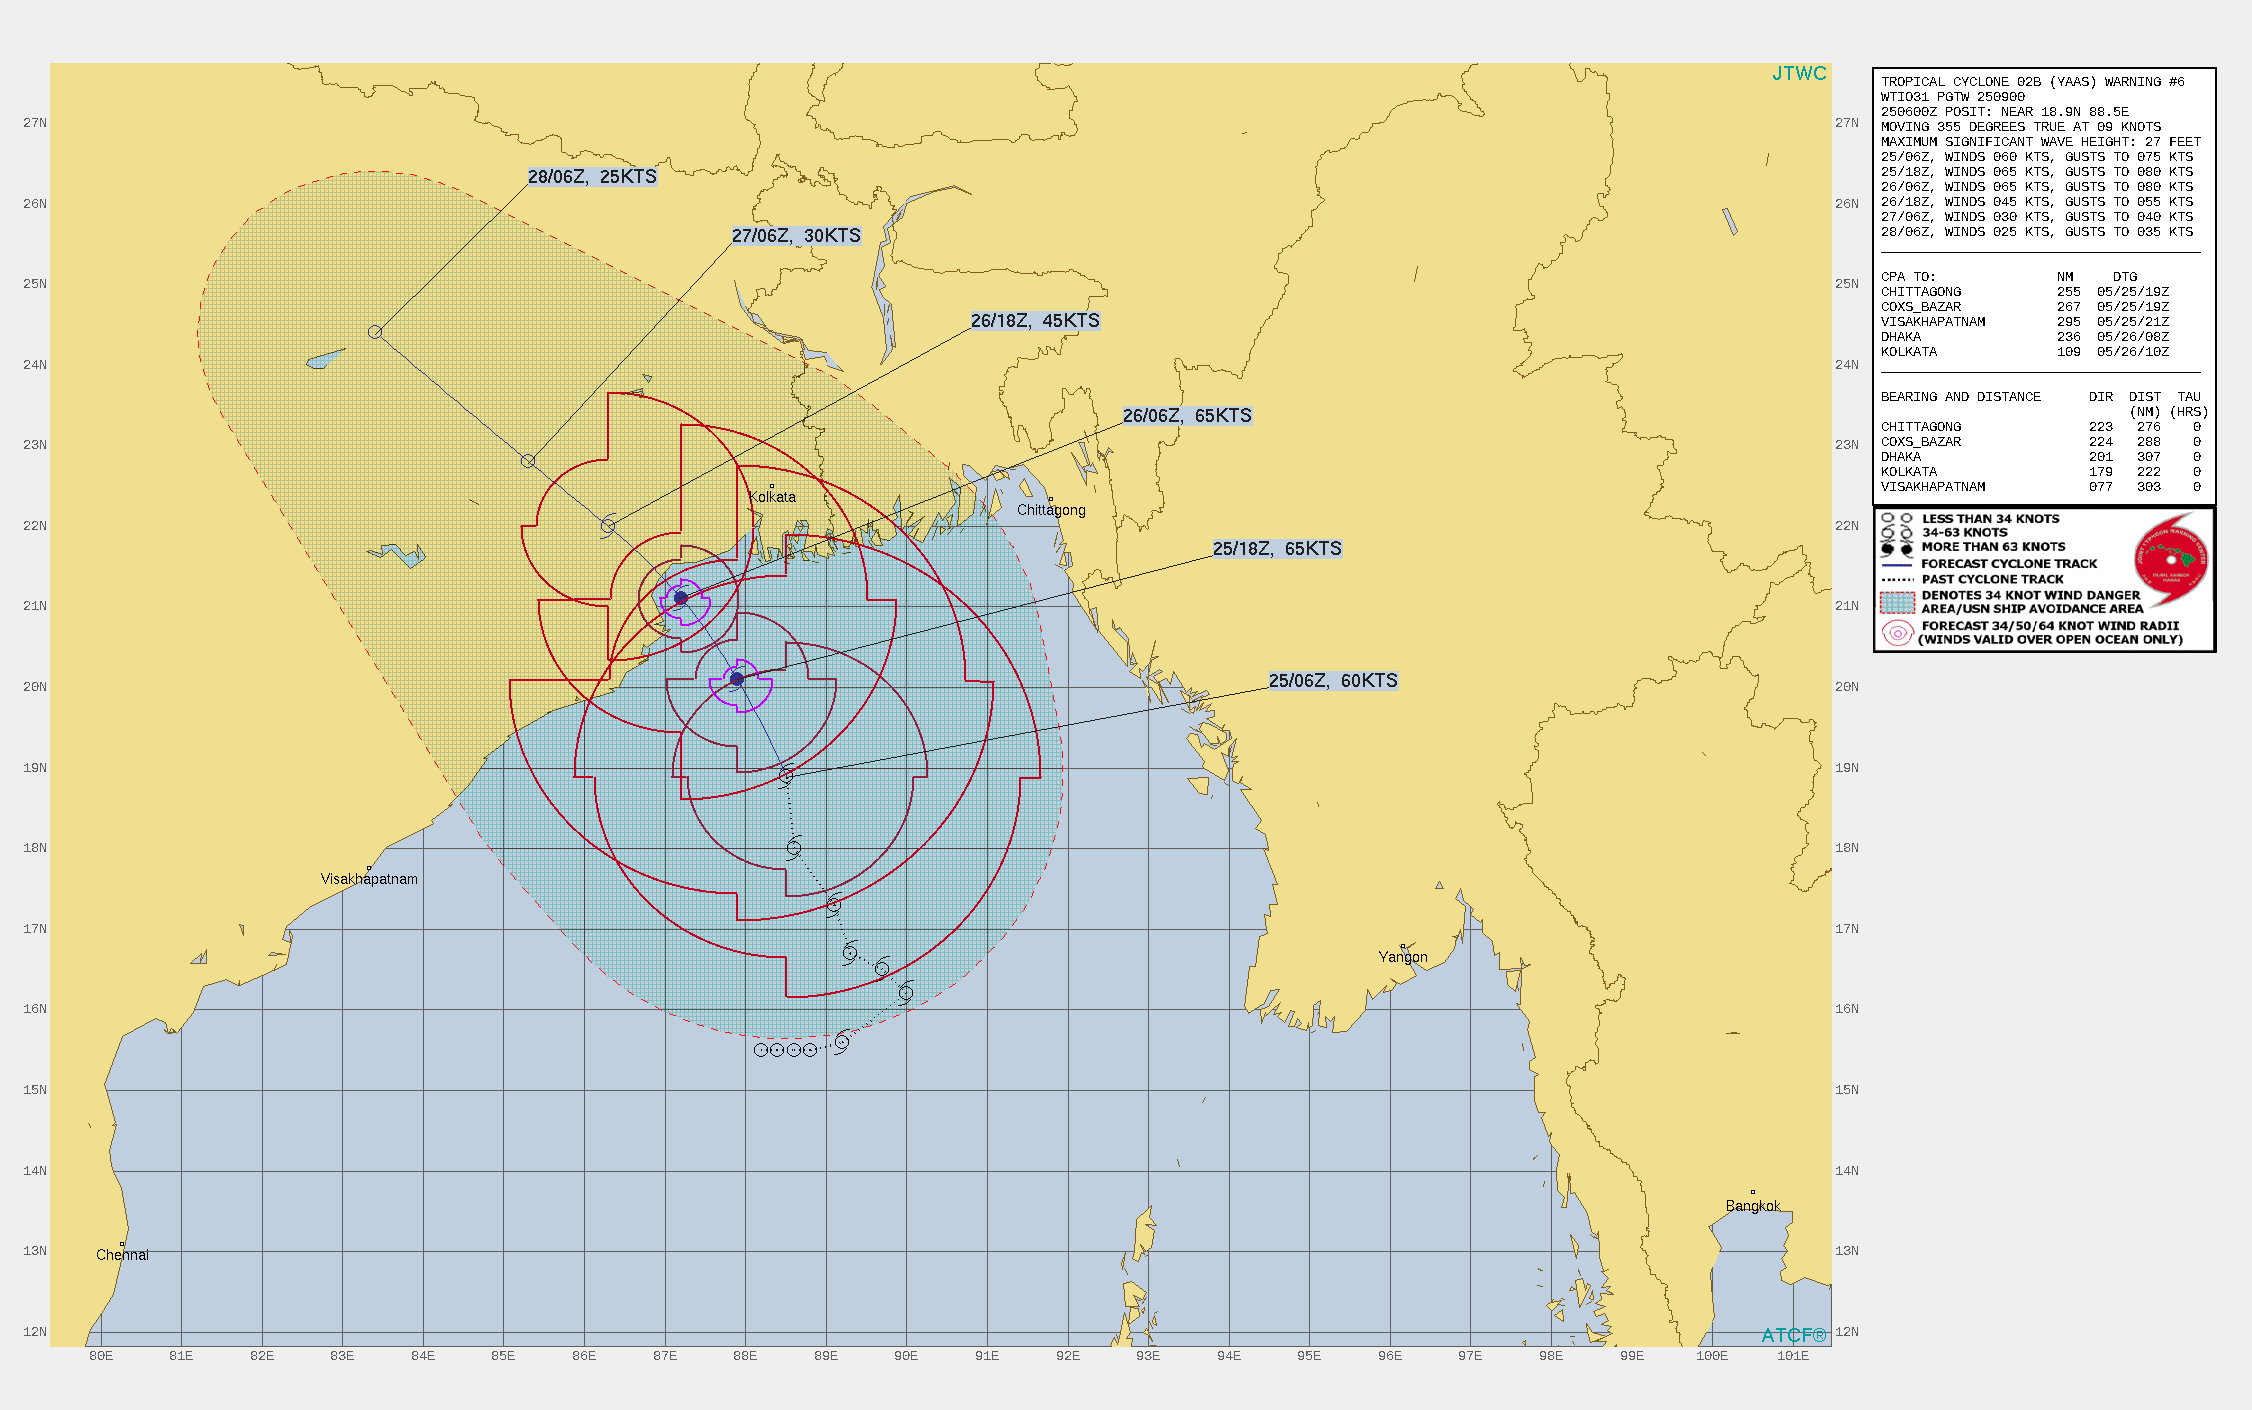 TC 02B(YAAS). WARNING 6 ISSUED AT 25/09UTC.TC 02B IS CURRENTLY IN A MARGINALLY FAVORABLE ENVIRONMENT WITH ROBUST RADIAL OUTFLOW ALOFT AND WARM  (30-31 C) SEA SURFACE TEMPERATURES OFFSET BY MODERATE RELATIVE VERTICAL  WIND SHEAR (20-25KTS). THE SYSTEM IS FORECAST TO REMAIN IN THE  MARGINALLY FAVORABLE ENVIRONMENT FOR THE NEXT 24 HOURS UP TO  LANDFALL SHORTLY AFTER 26/06UTC. TC 02B WILL CONTINUE SLIGHTLY  INTENSIFYING AS IT TRACKS NORTH-NORTHWESTWARD ALONG THE WESTERN  PERIPHERY OF A SUBTROPICAL RIDGE TO THE NORTHEAST. AFTER 12H, THE  VERTICAL WIND SHEAR IS FORECAST TO DECREASE TO 15KTS, ALLOWING TC  02B TO REACH A PEAK INTENSITY OF 65KNOTS/US CAT 1. AFTER 24H, THE SYSTEM  WILL CONTINUE TRACKING NORTH-NORTHWESTWARD ALONG THE WESTERN  PERIPHERY OF A SUBTROPICAL RIDGE TO THE NORTHEAST AND MAKE LANDFALL  NEAR BHITARKANIKA NATIONAL PARK, INDIA. AFTER MAKING LANDFALL, THE  SYSTEM WILL BEGIN DECAYING DUE TO LAND INTERACTION AND FULLY  DISSIPATE BY 72H, IF NOT SOONER.